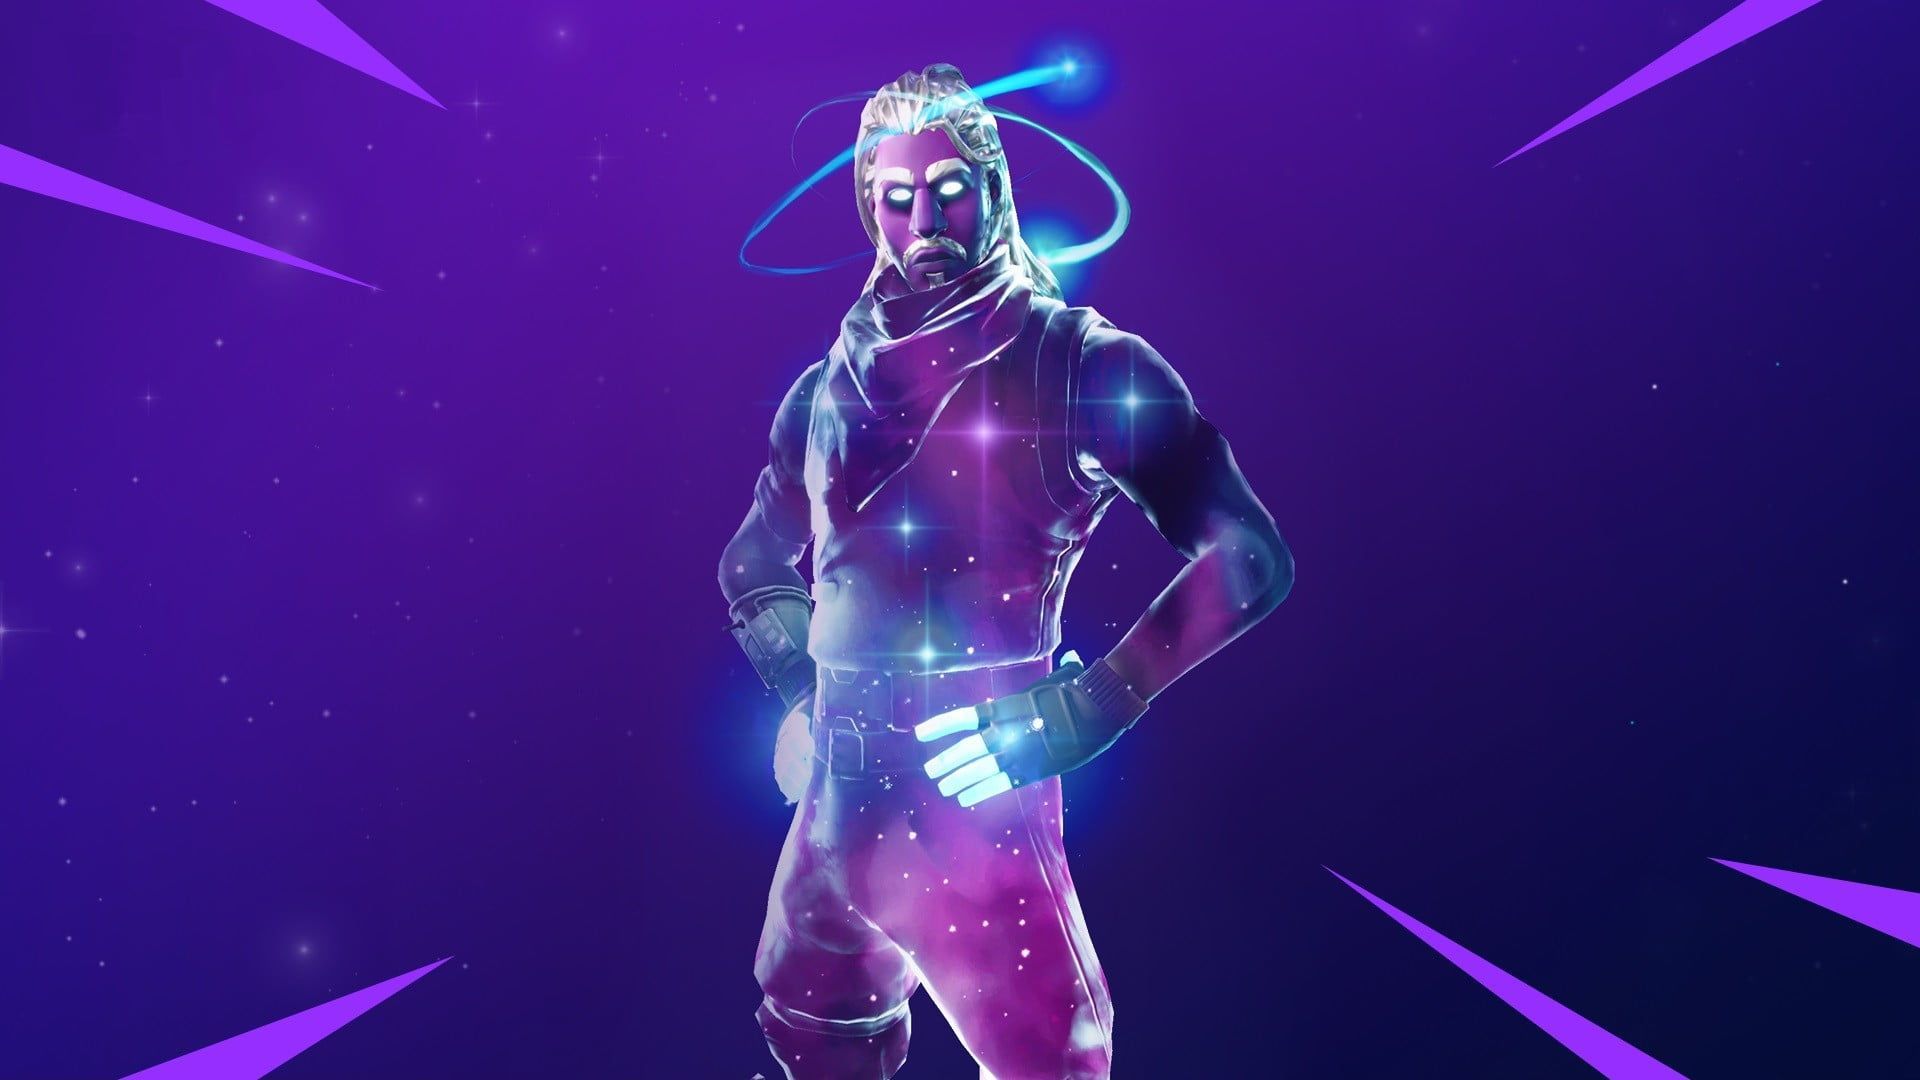 Fortnite Pictures Of Skins Wallpapers